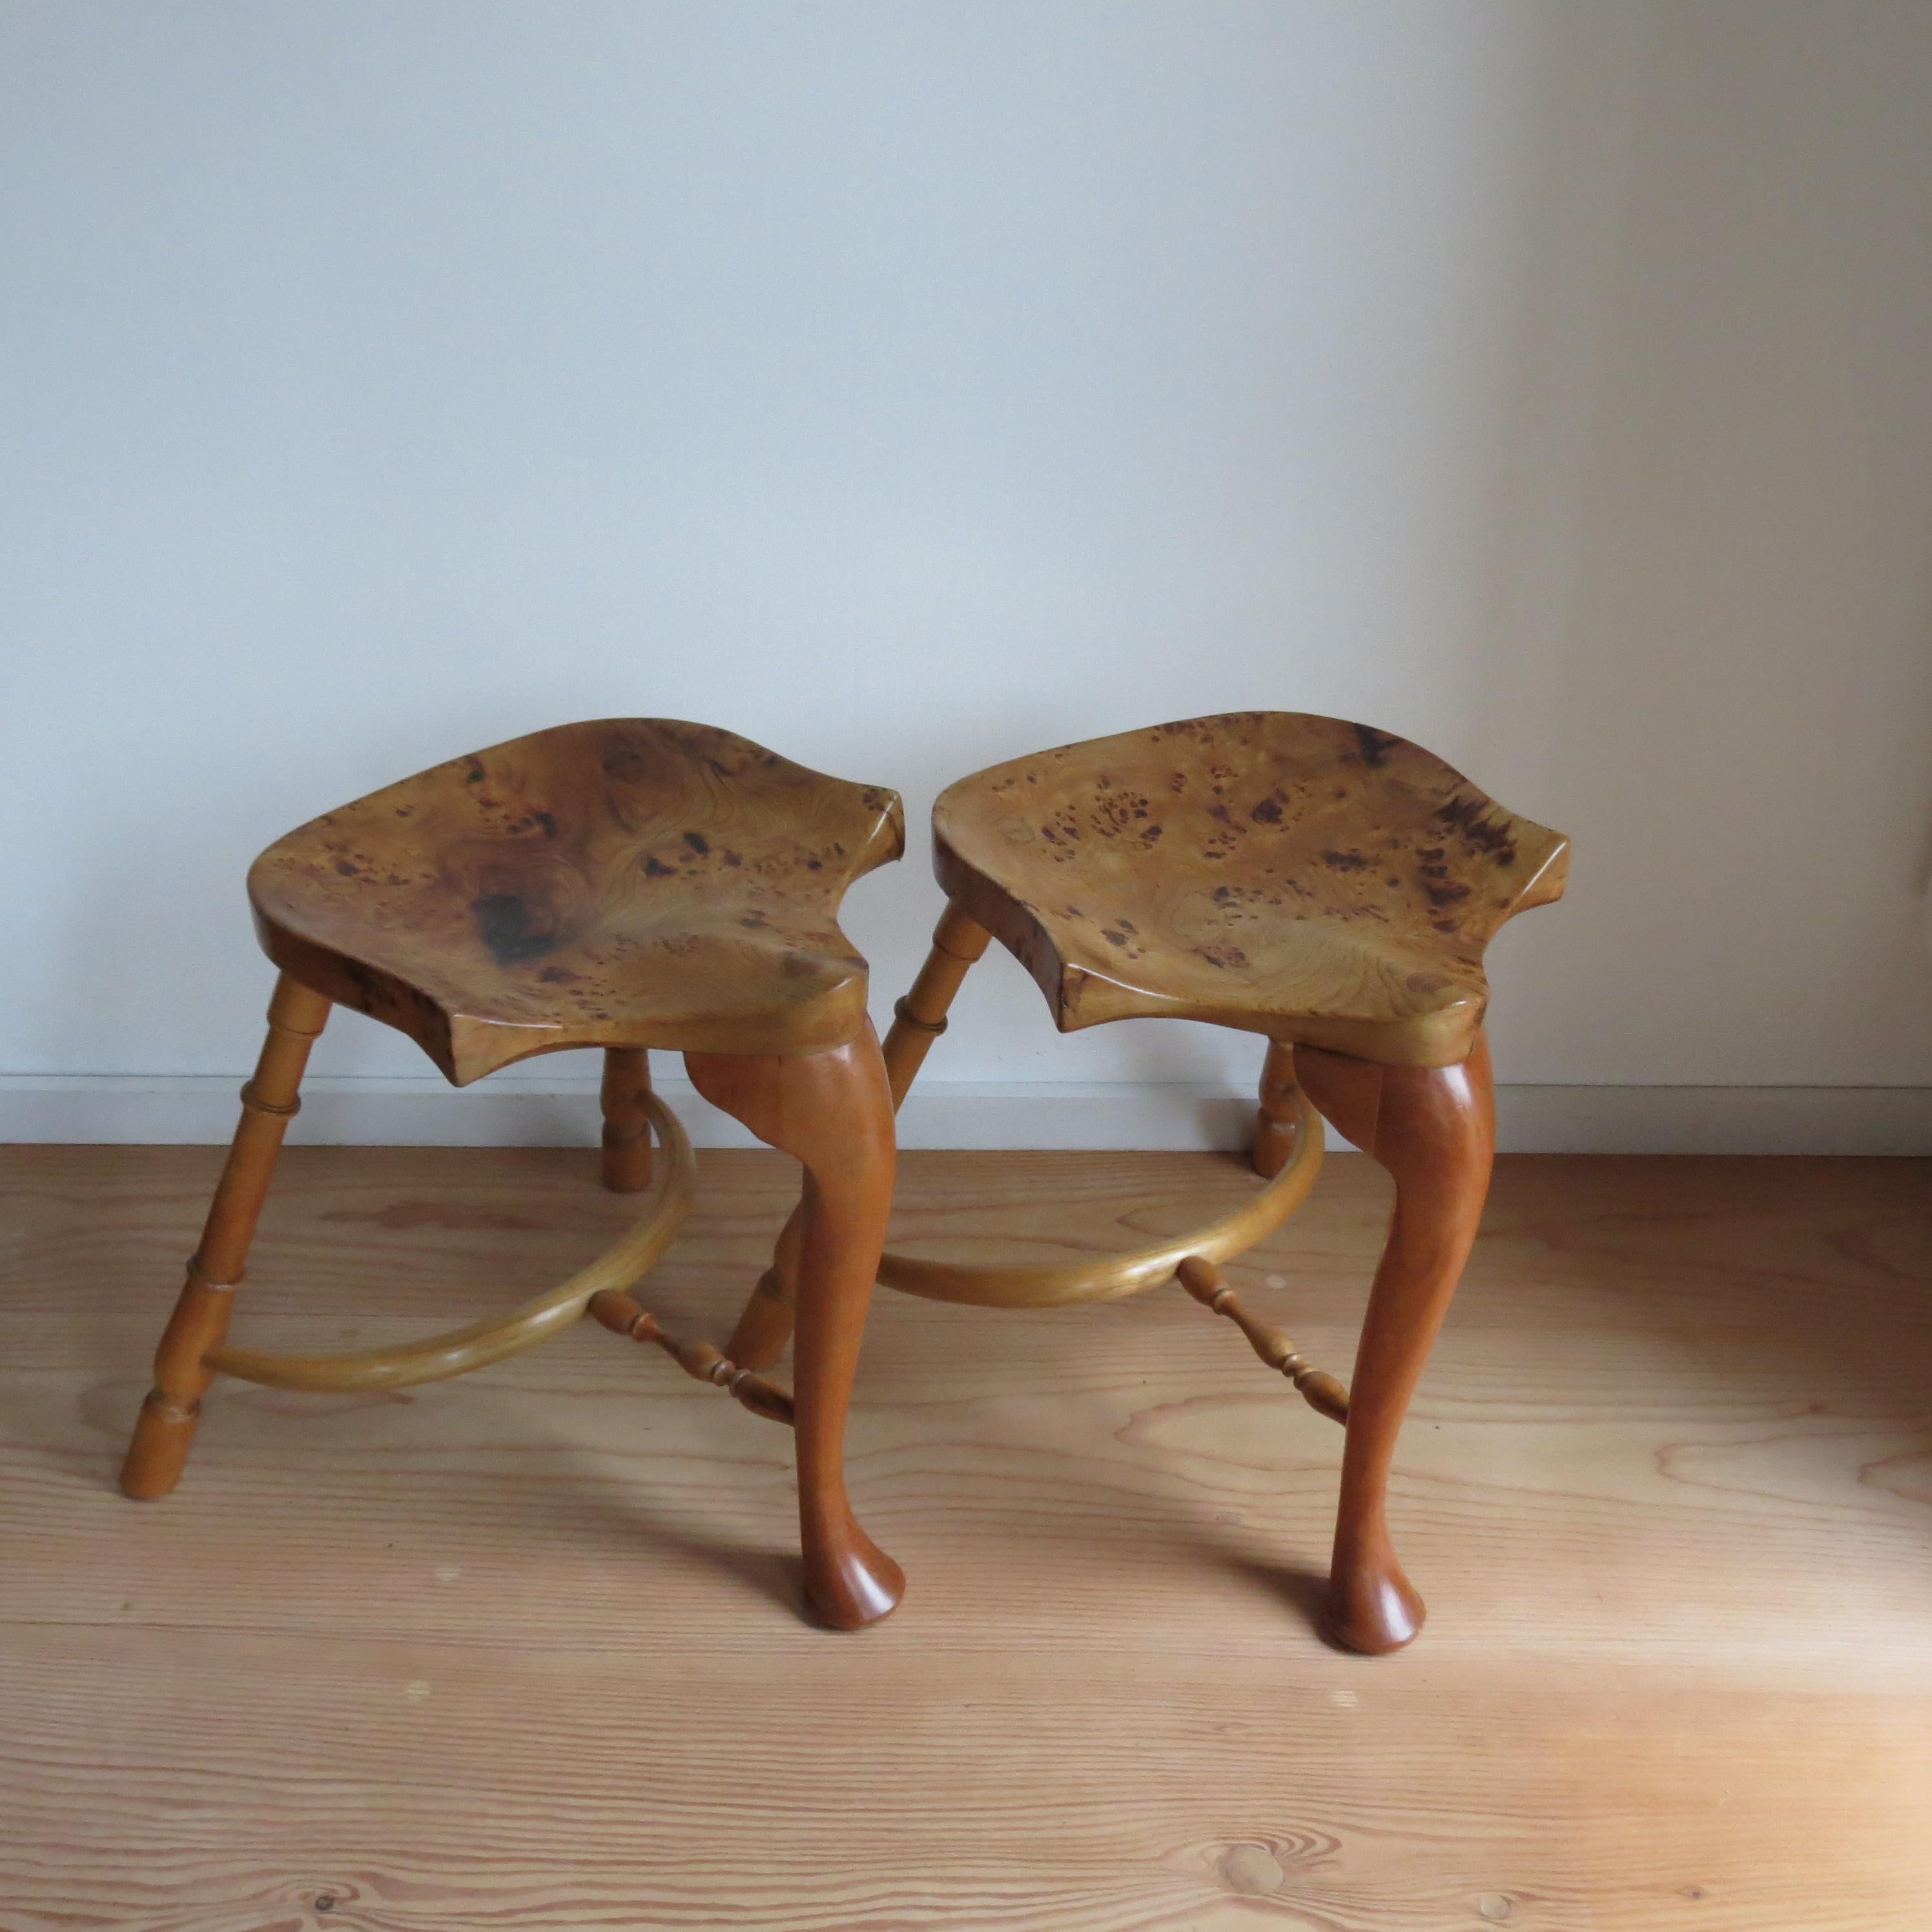 Pair of wonderful good quality hand produced bespoke stools by Stewart Linford. These date from the 1990s. The stool's wonderfully sculptural seat is made from solid Burr Ash with good figurative detail to the grain, with turned legs made from solid